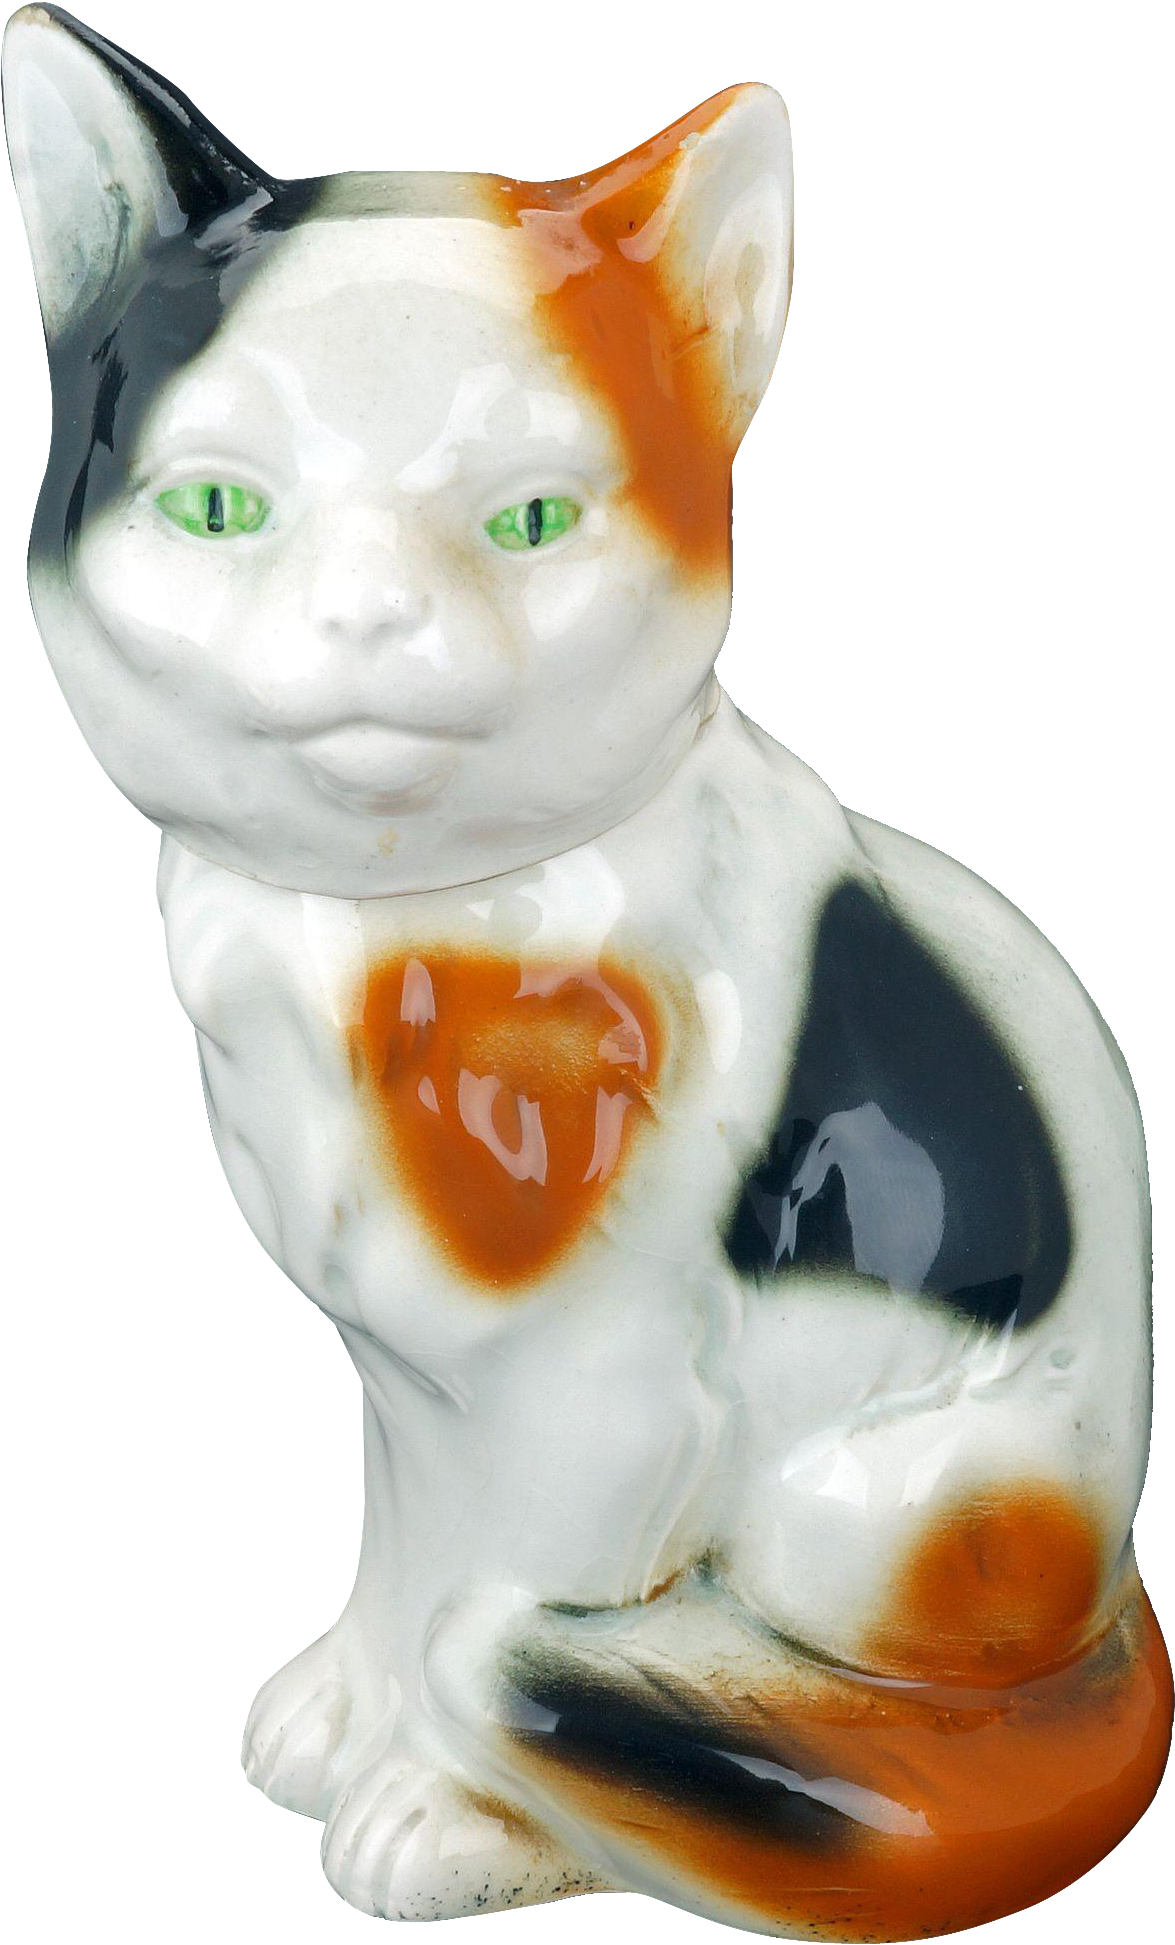 A Ceramic Cat Statue With Green Eyes